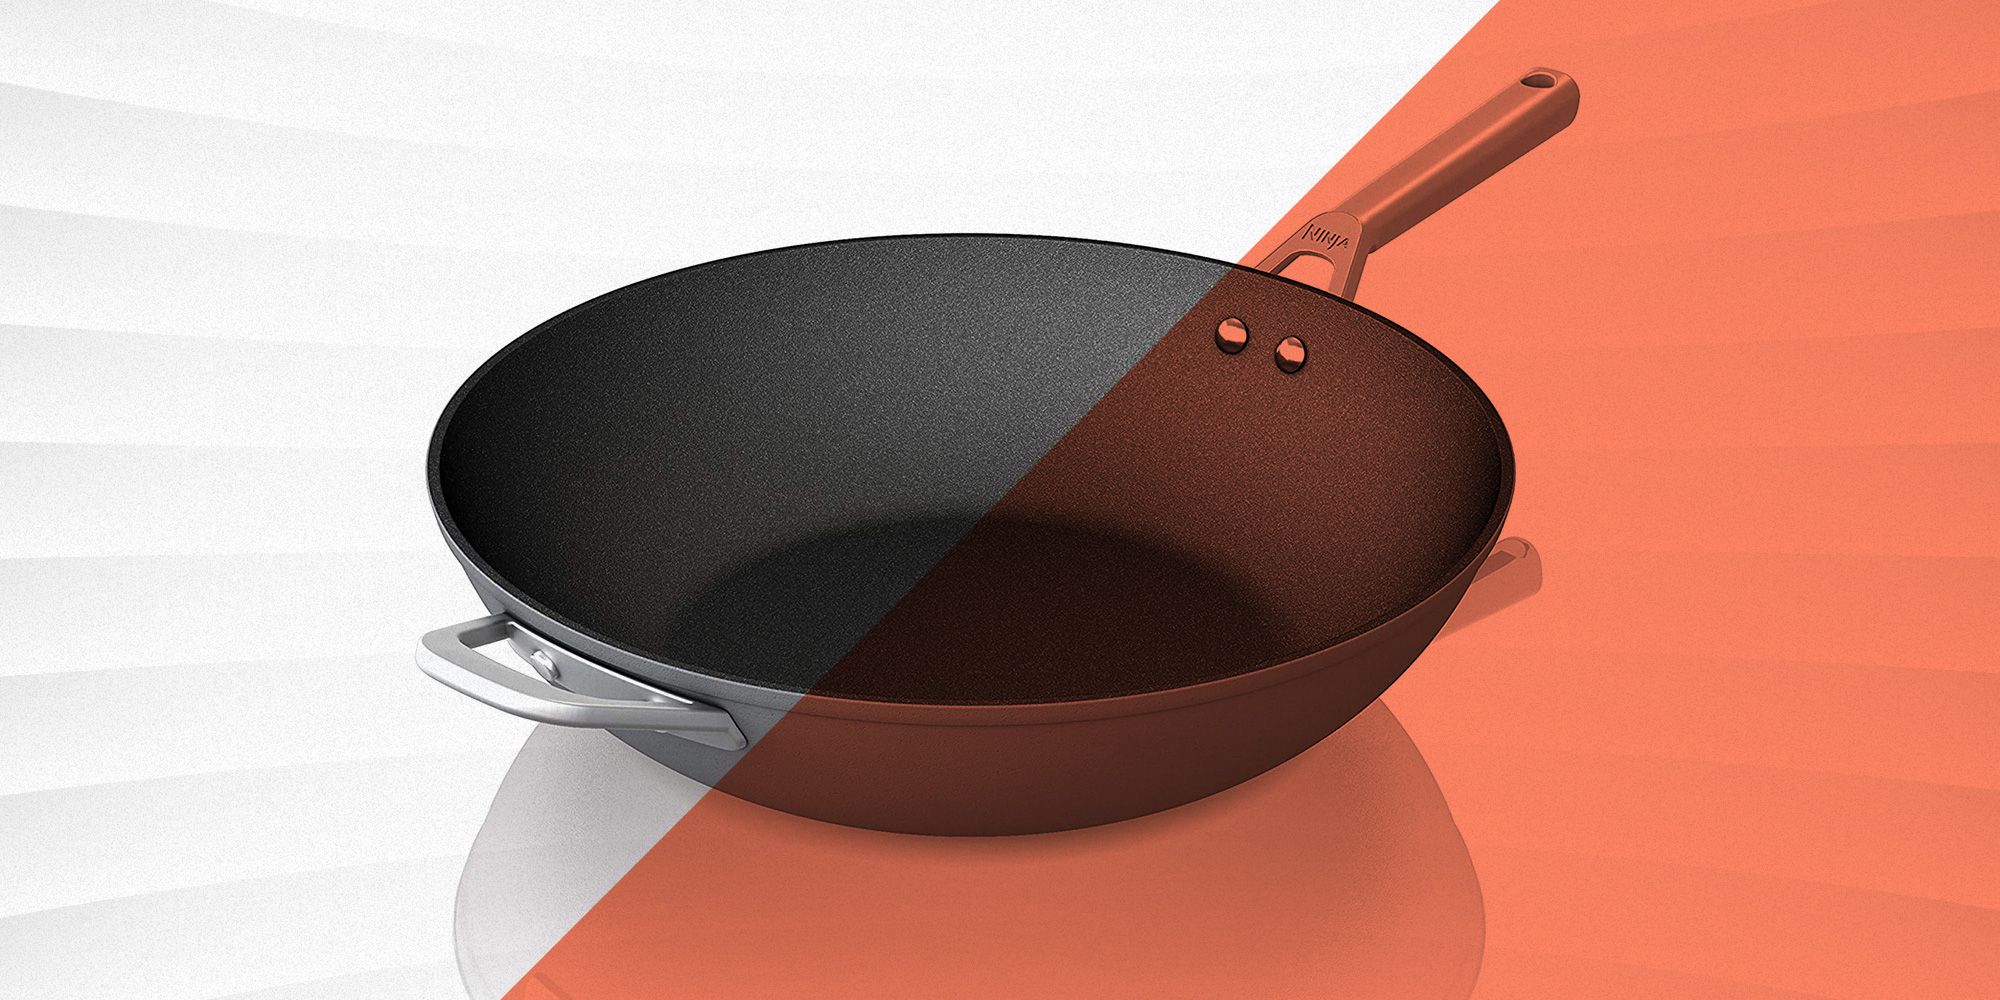 Cast Iron vs Ceramic Cookware: Which One To Get?